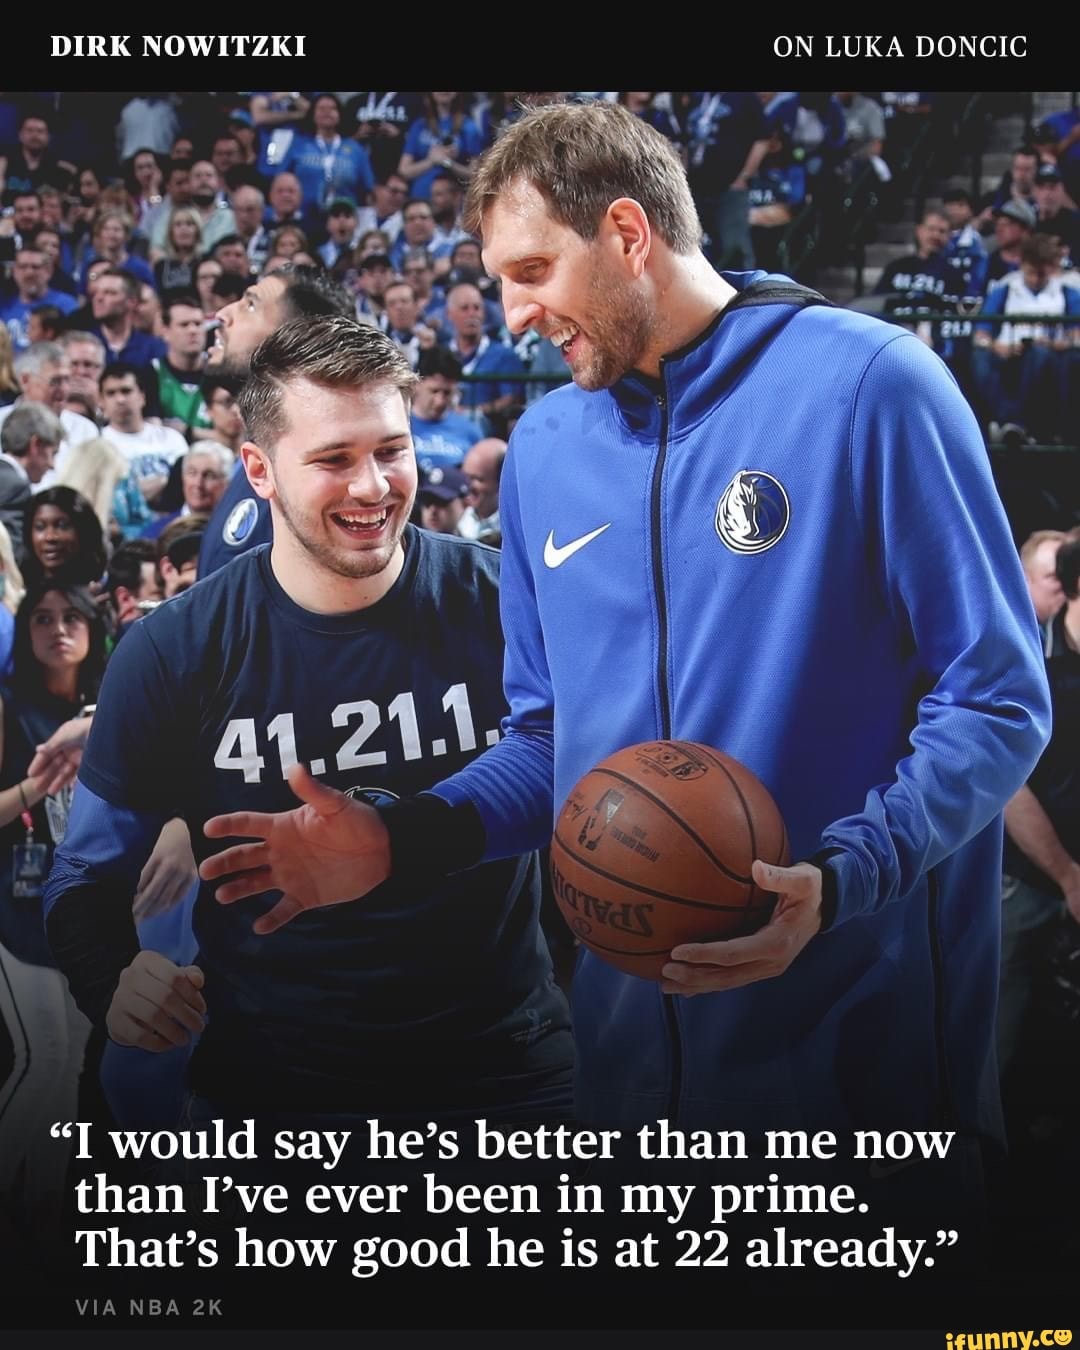 Dirk Nowitzki on Luka Doncic: He's better now than I ever was in